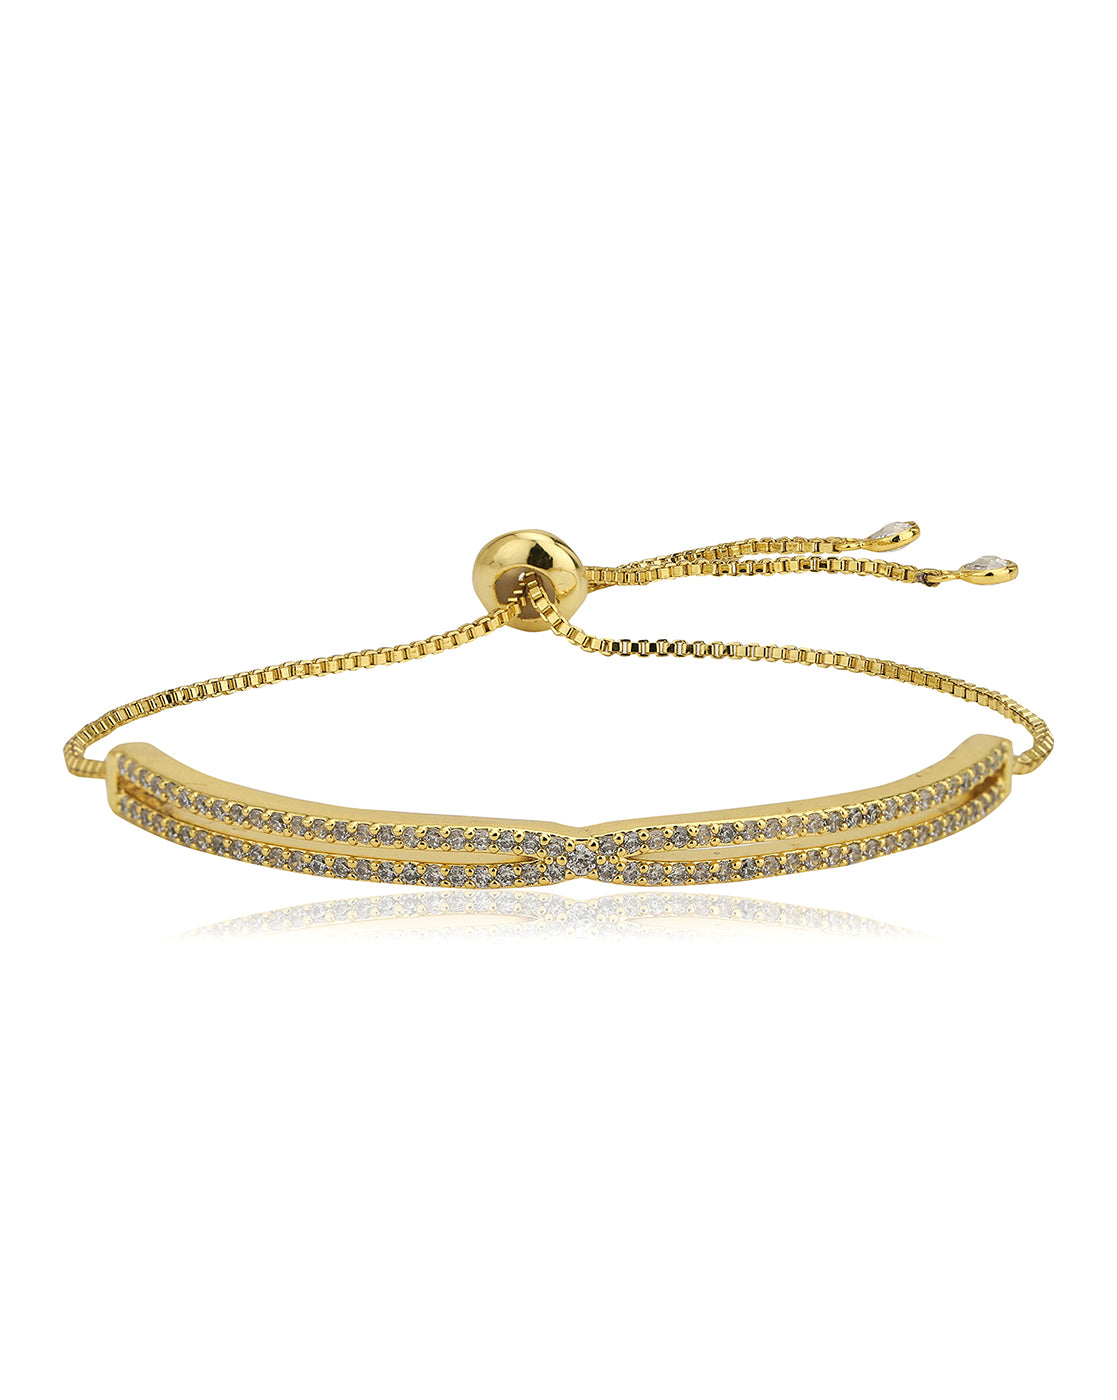 Premium Gold Plated With Cz Fancy Adjustable Bracelet For Women